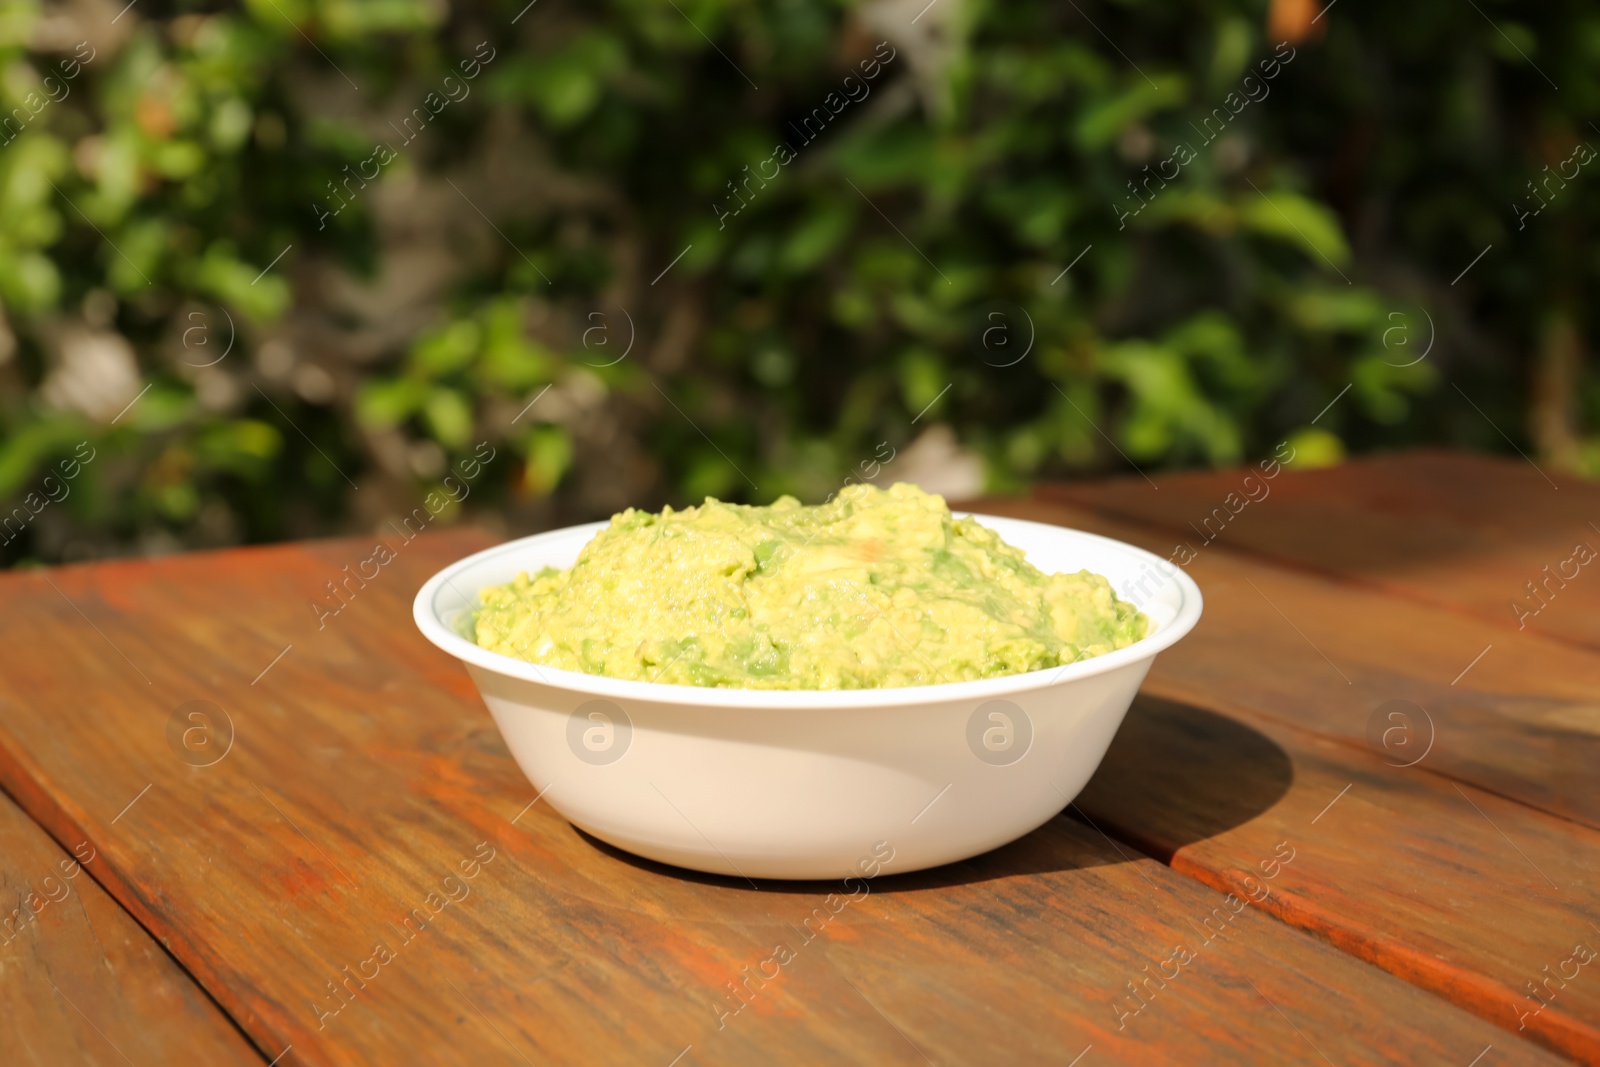 Photo of Delicious guacamole made of avocados on wooden table outdoors